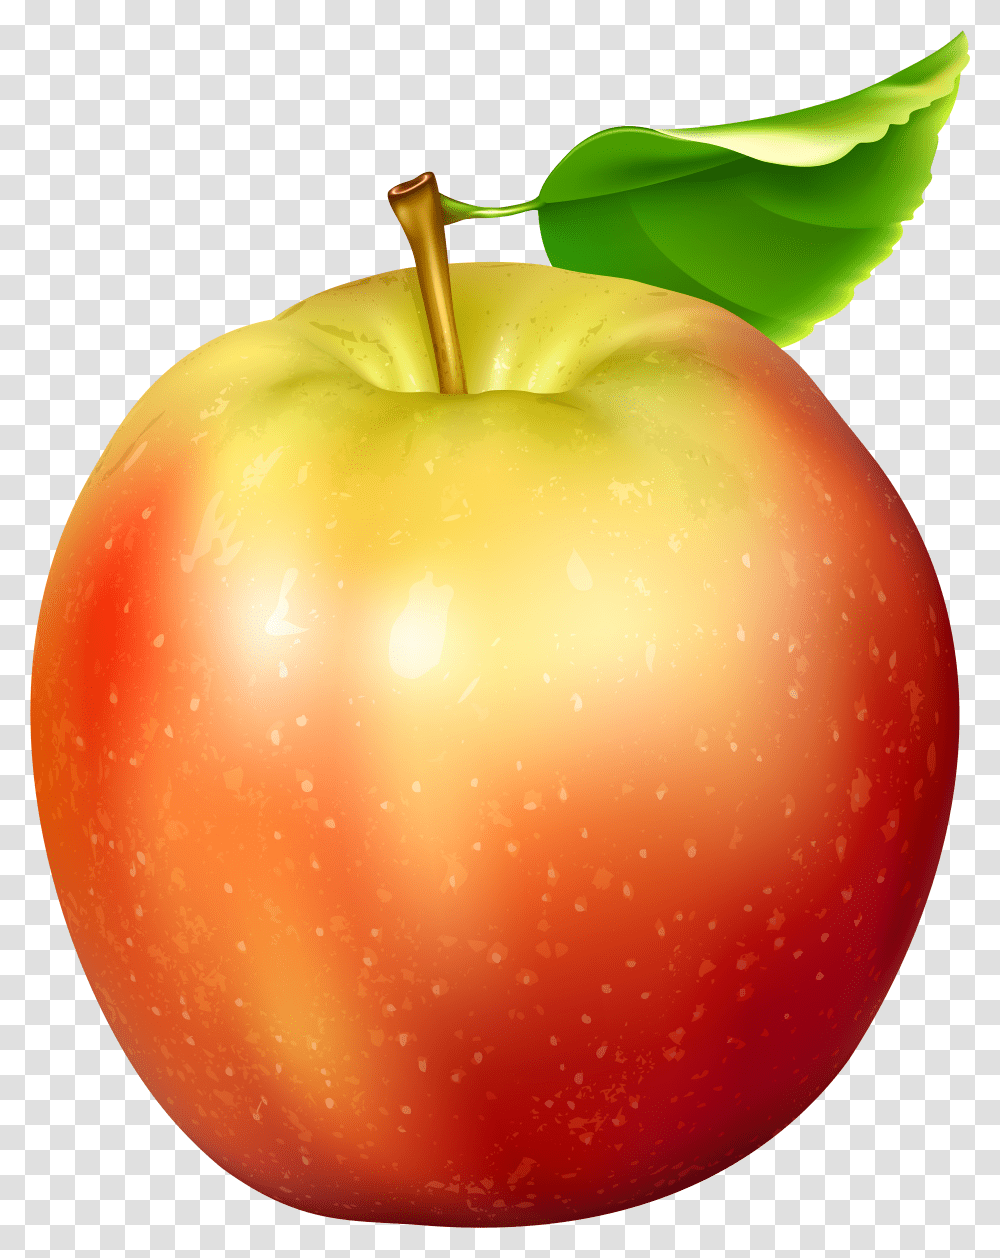 Apple Clip Art Orange Yellow And Red Apple Transparent Png